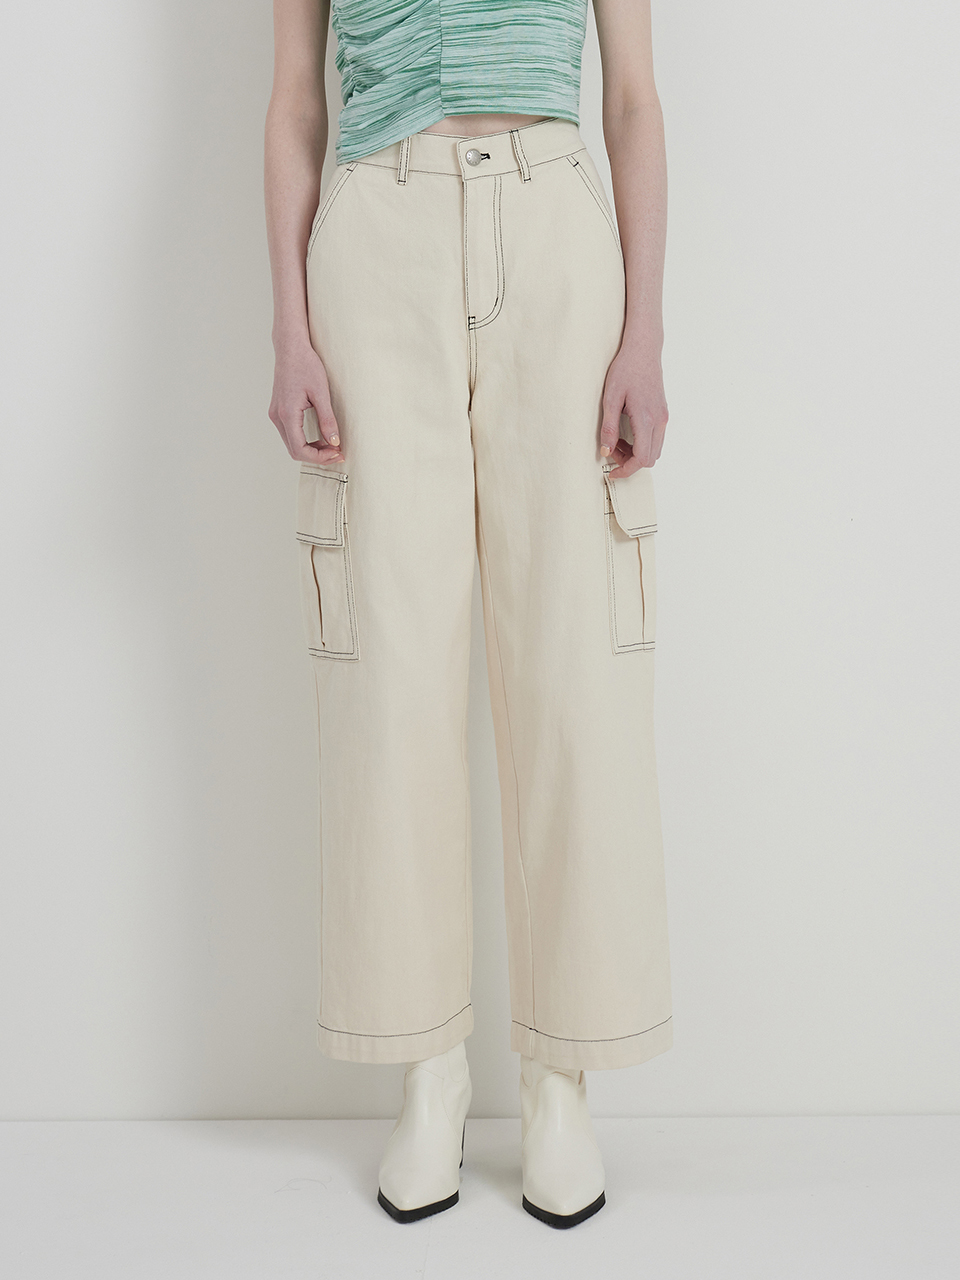 Ivory color cargo pants